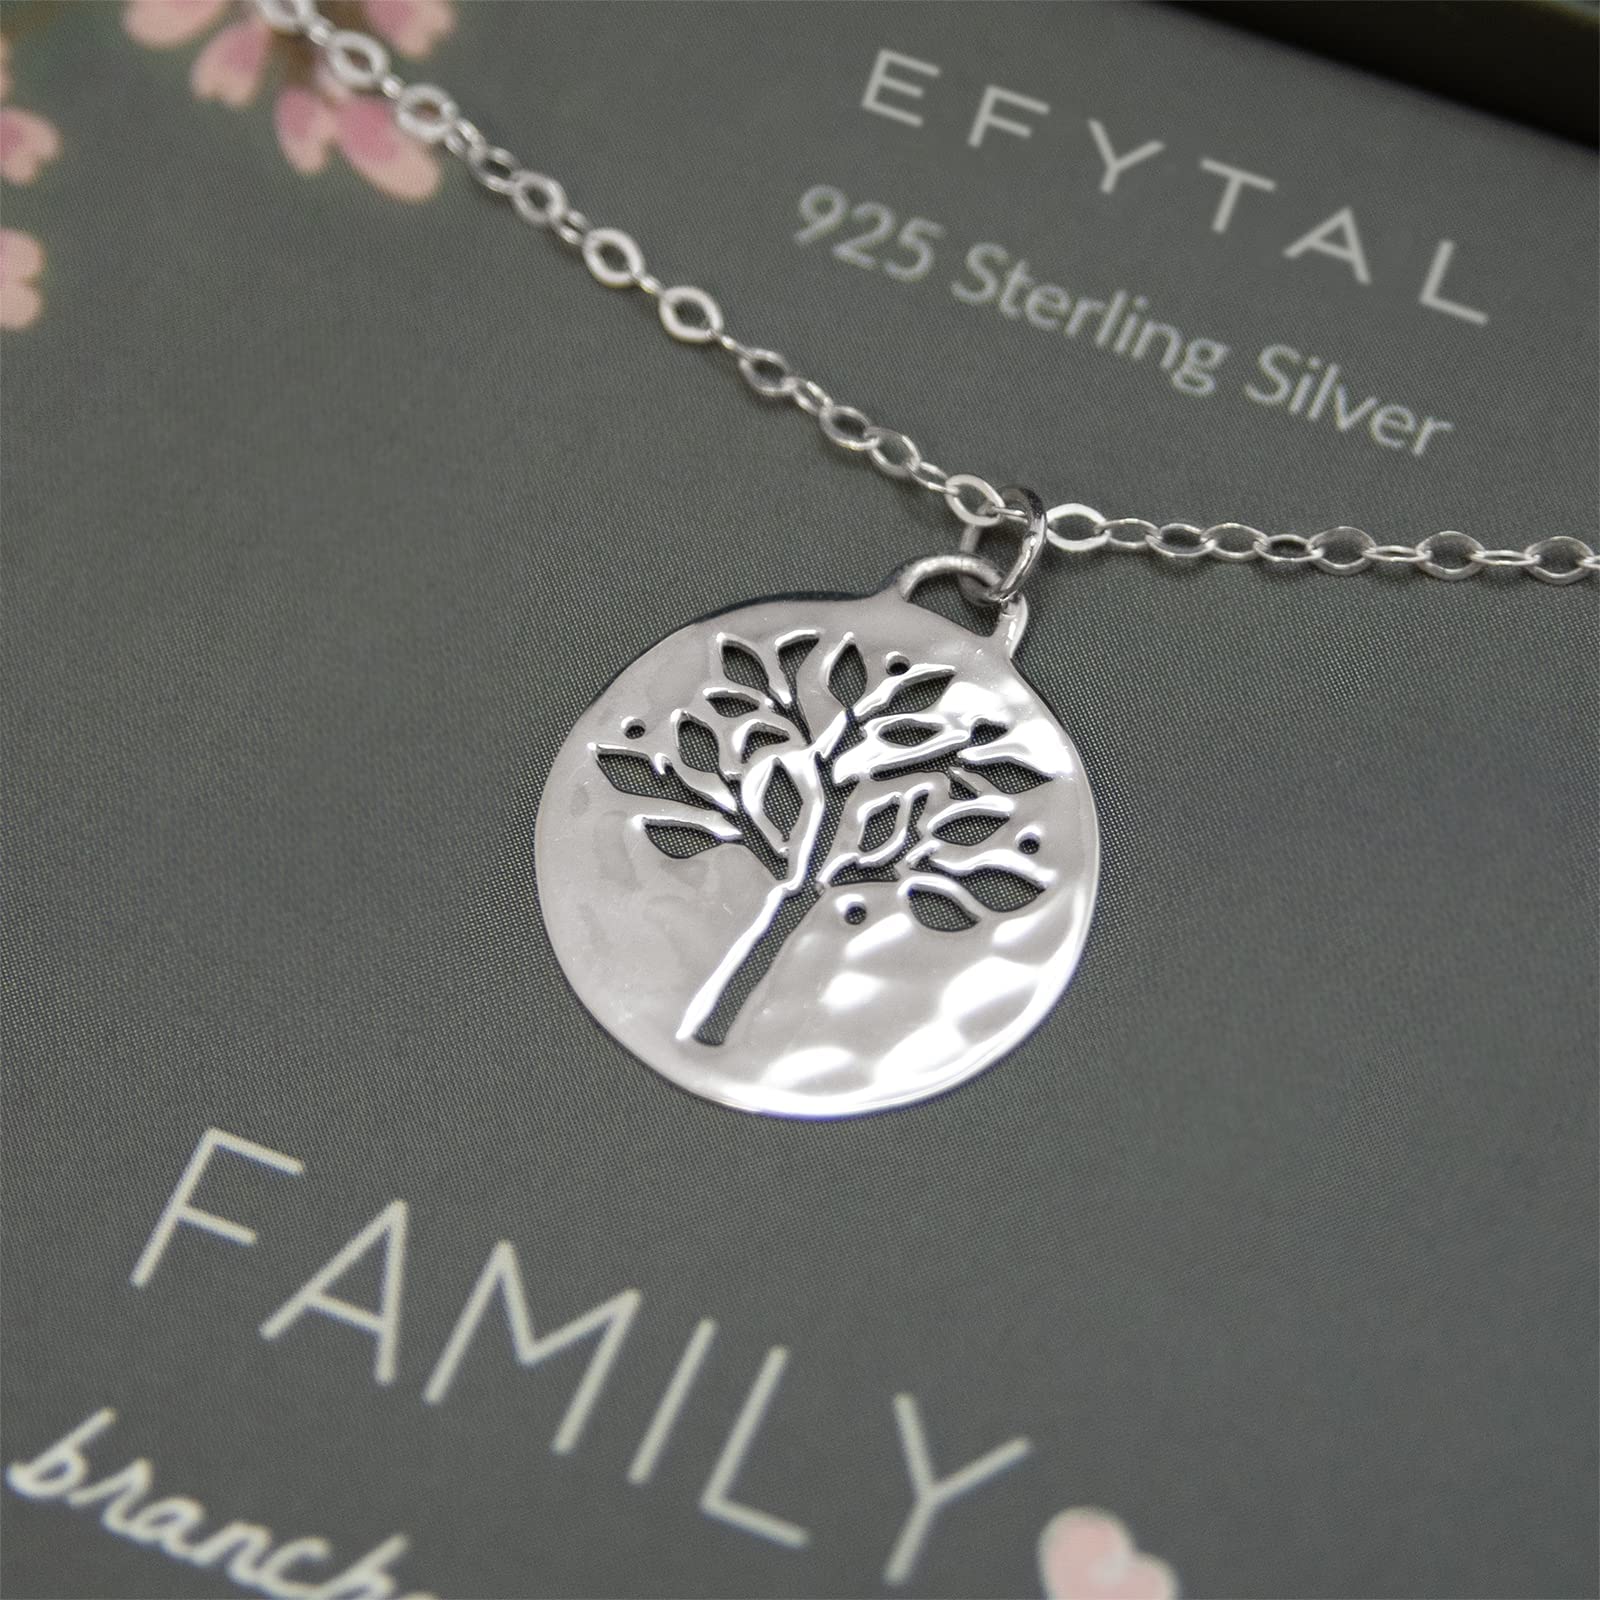 EFYTAL Grandma Gifts, 925 Sterling Silver Family Tree of Life Necklace, Mother's Day Jewelry Gift Ideas